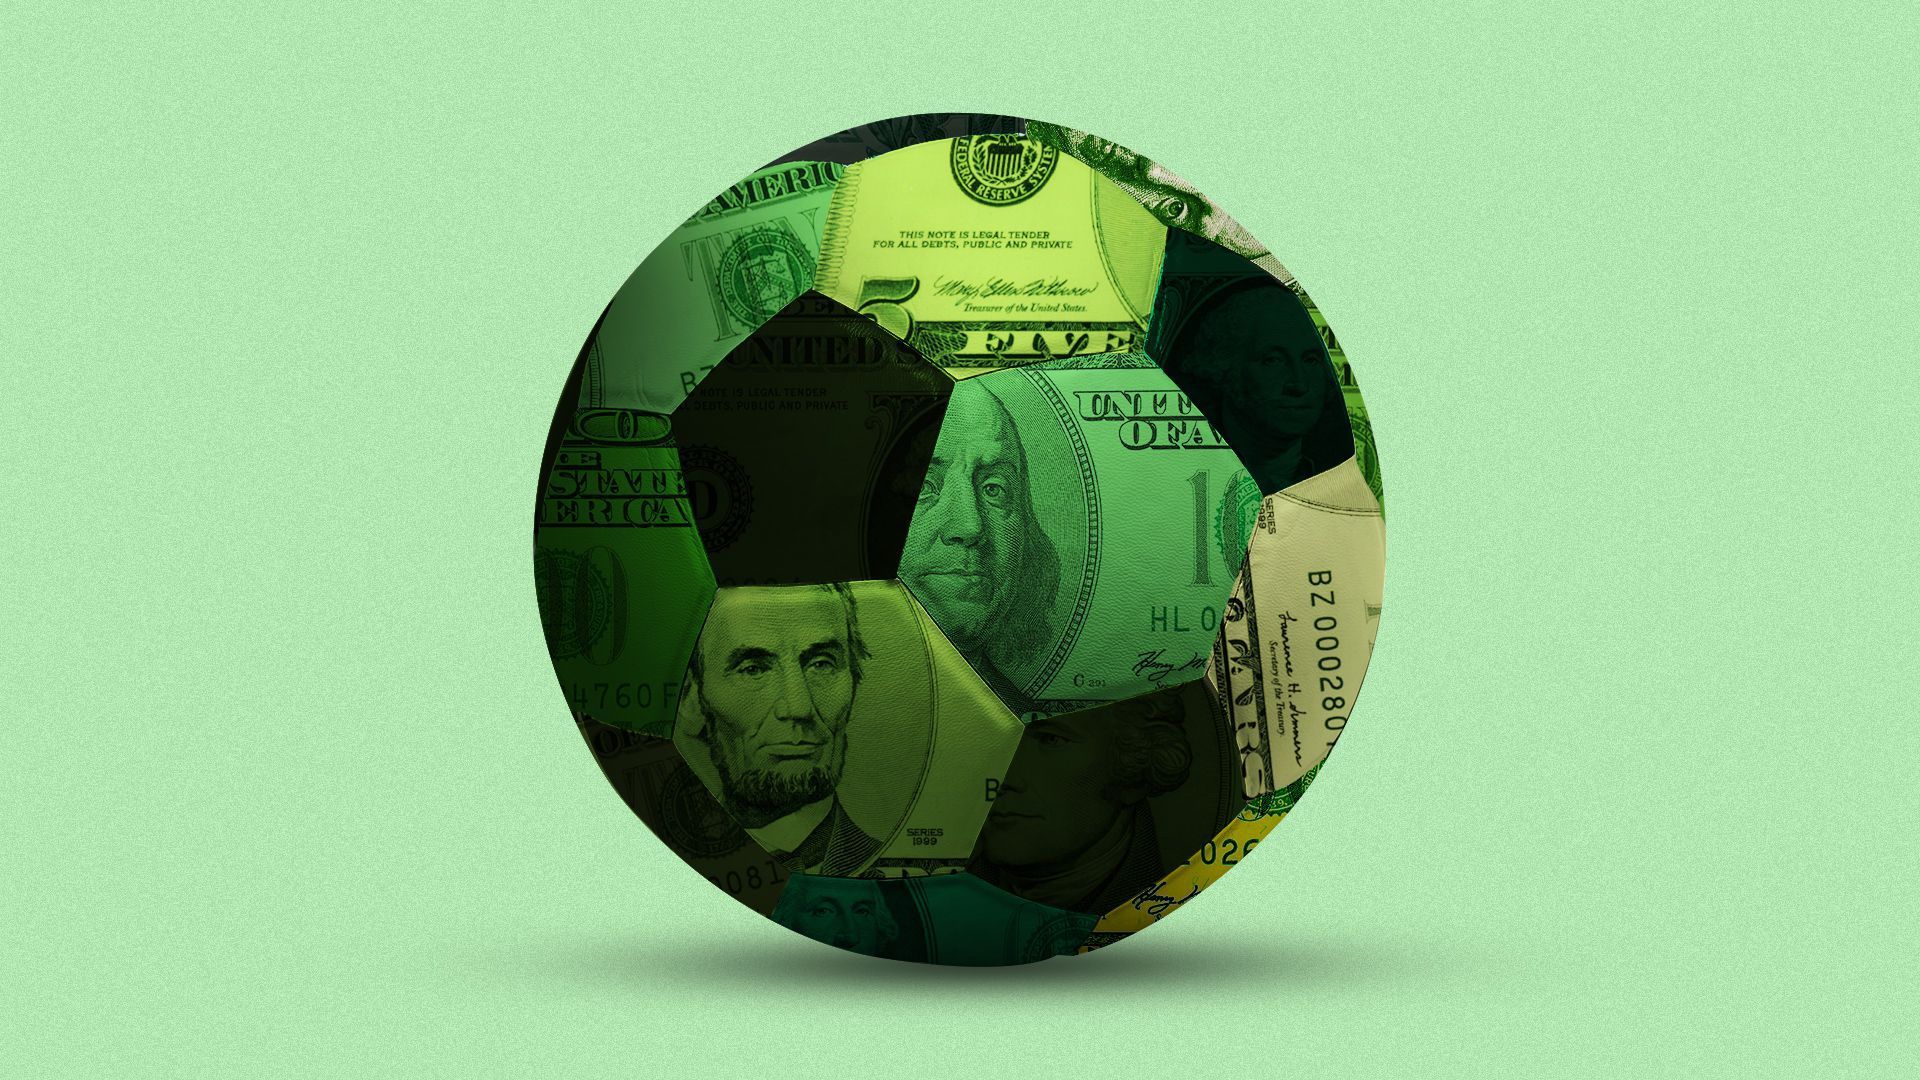 Illustration of a soccer ball with $100 bills on it.